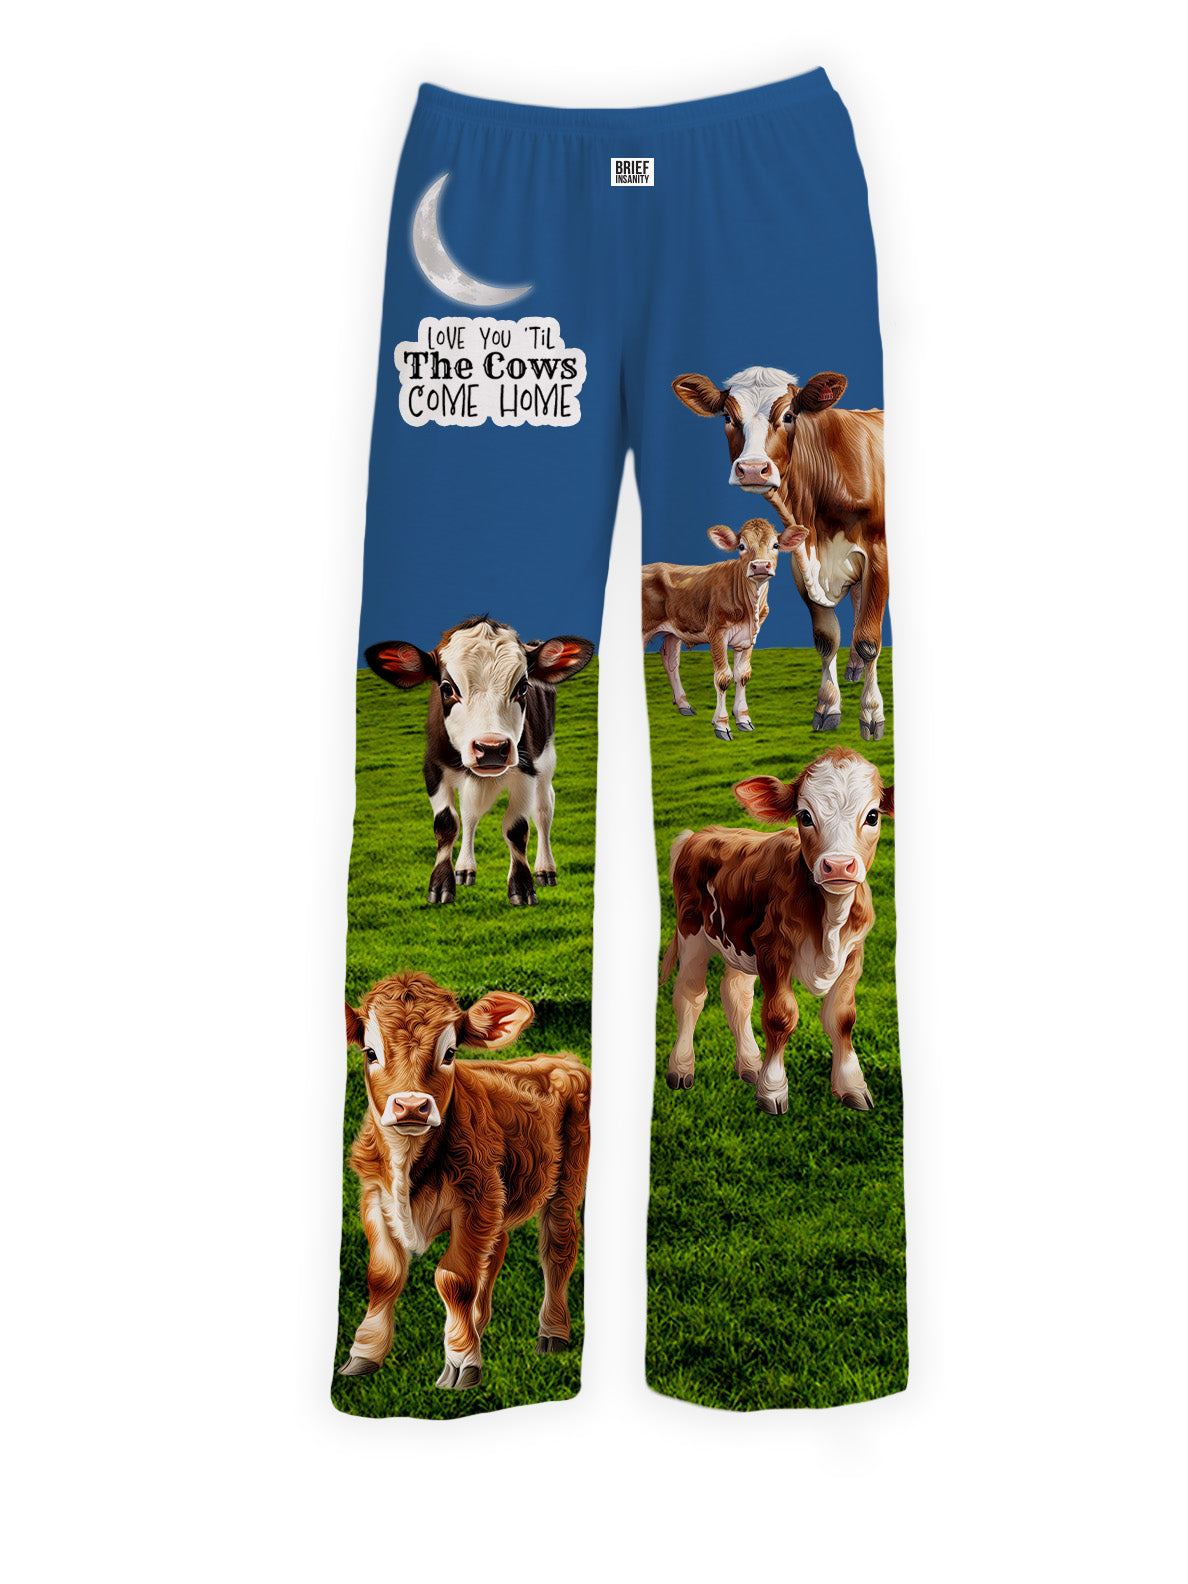 BRIEF INSANITY's Love You 'Til The Cows Come Home Pajama Lounge Pants